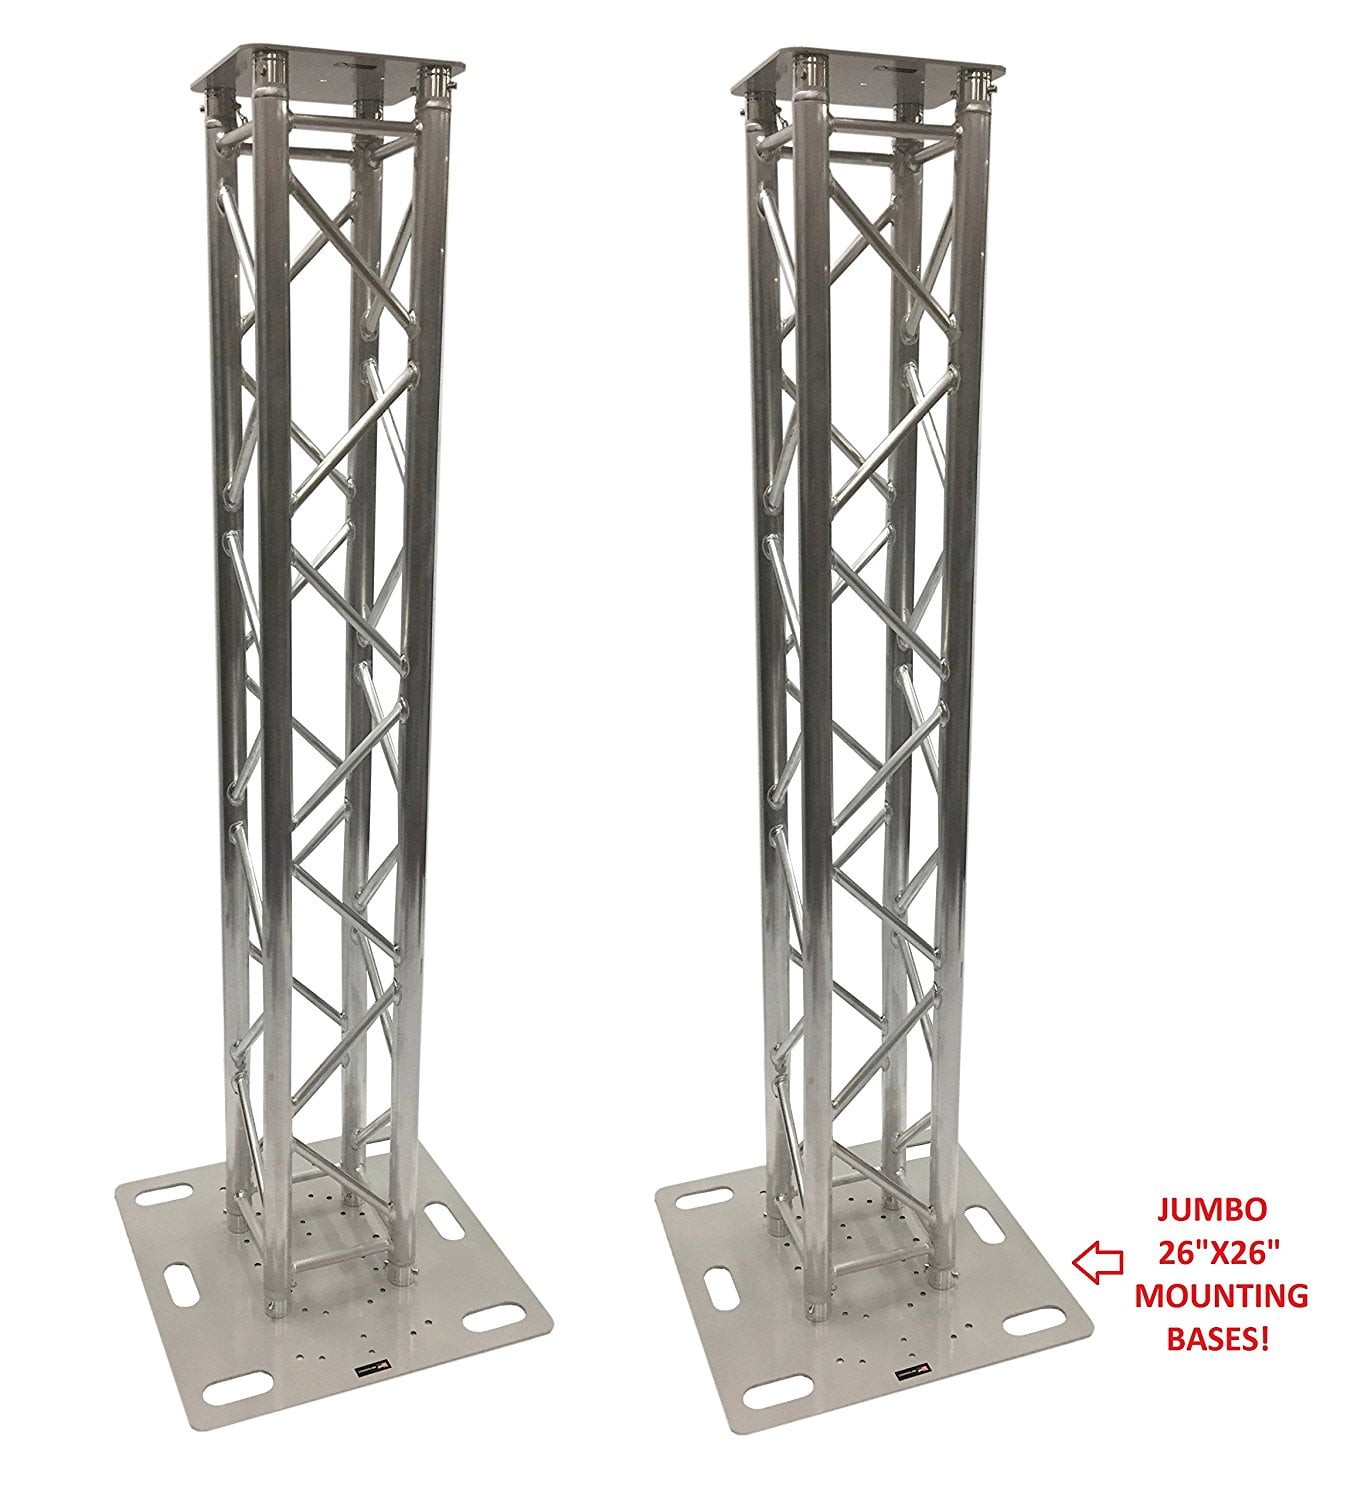 2 Dj Lighting Aluminum Truss Light Weight Dual 6 56 Ft Totem System Moving Head Includes 26 X26 Bases Instead Of 24 X24 Like Others Walmart Com